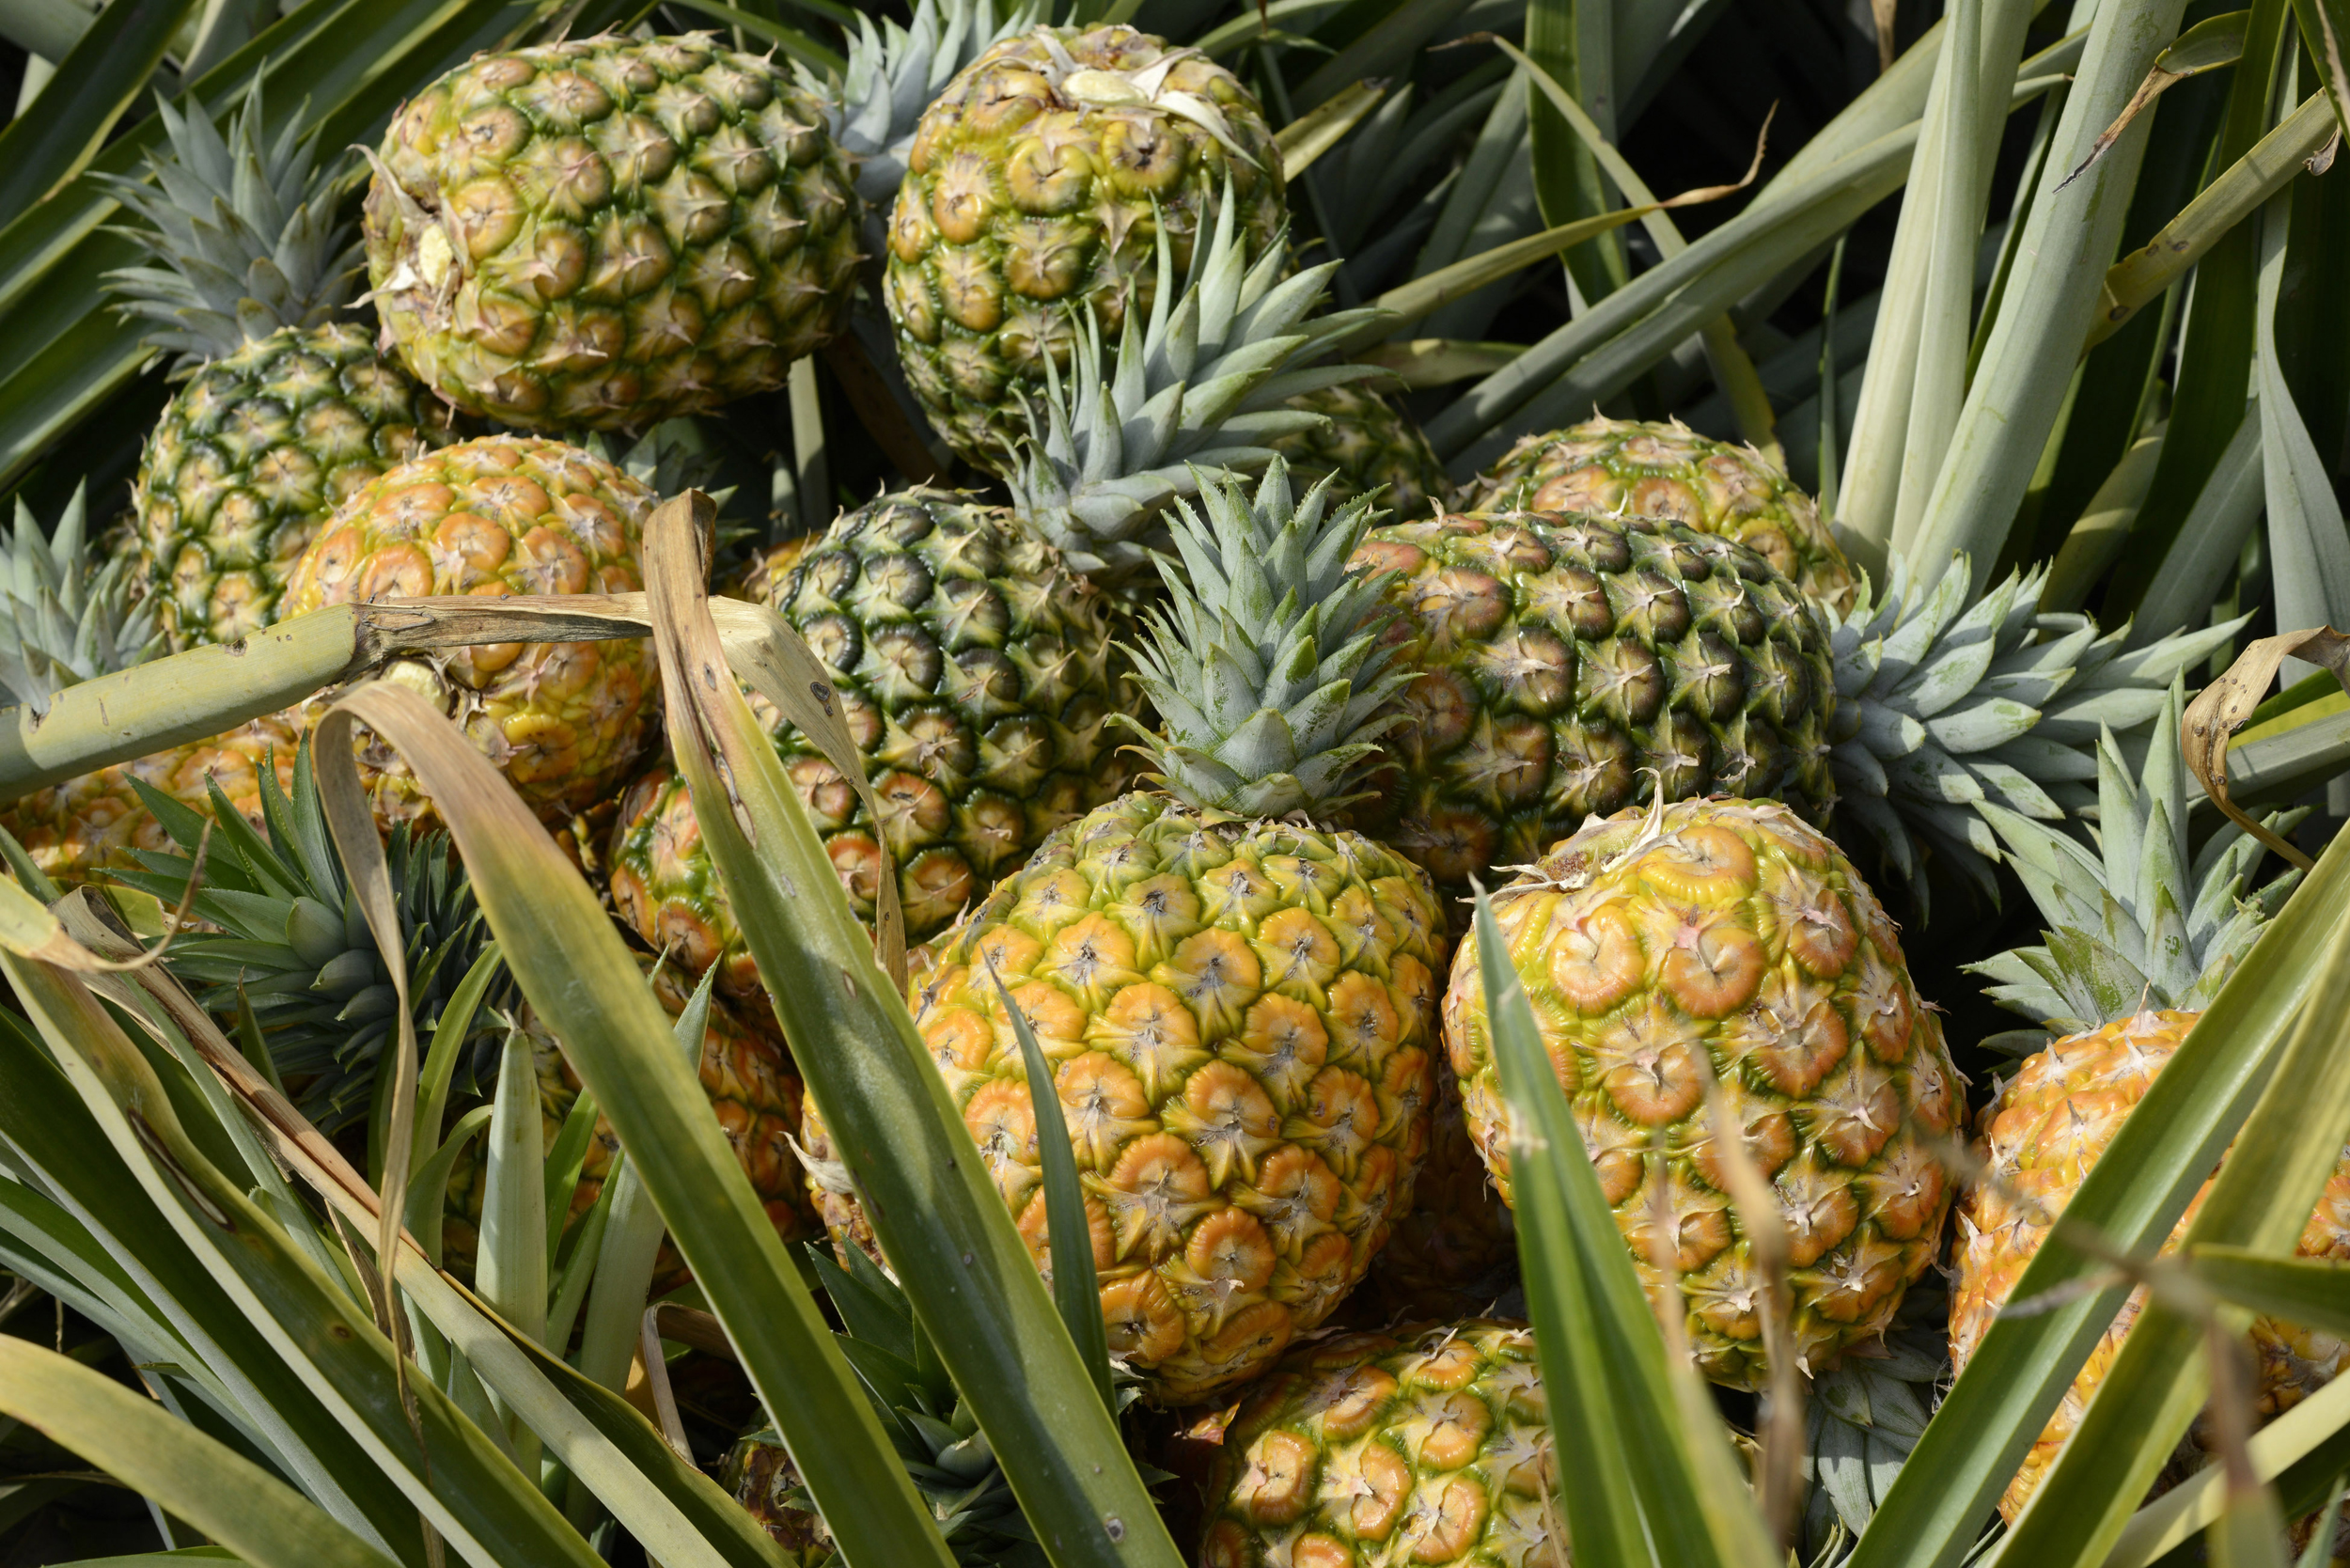 PEREIRA, COLOMBIA - JANUARY 17, 2014: The picked pineapples lay in the middle of a large plantation on January 17, 2014 outside Pereira, Colombia. (Photo by Kaveh Kazemi/Getty Images)